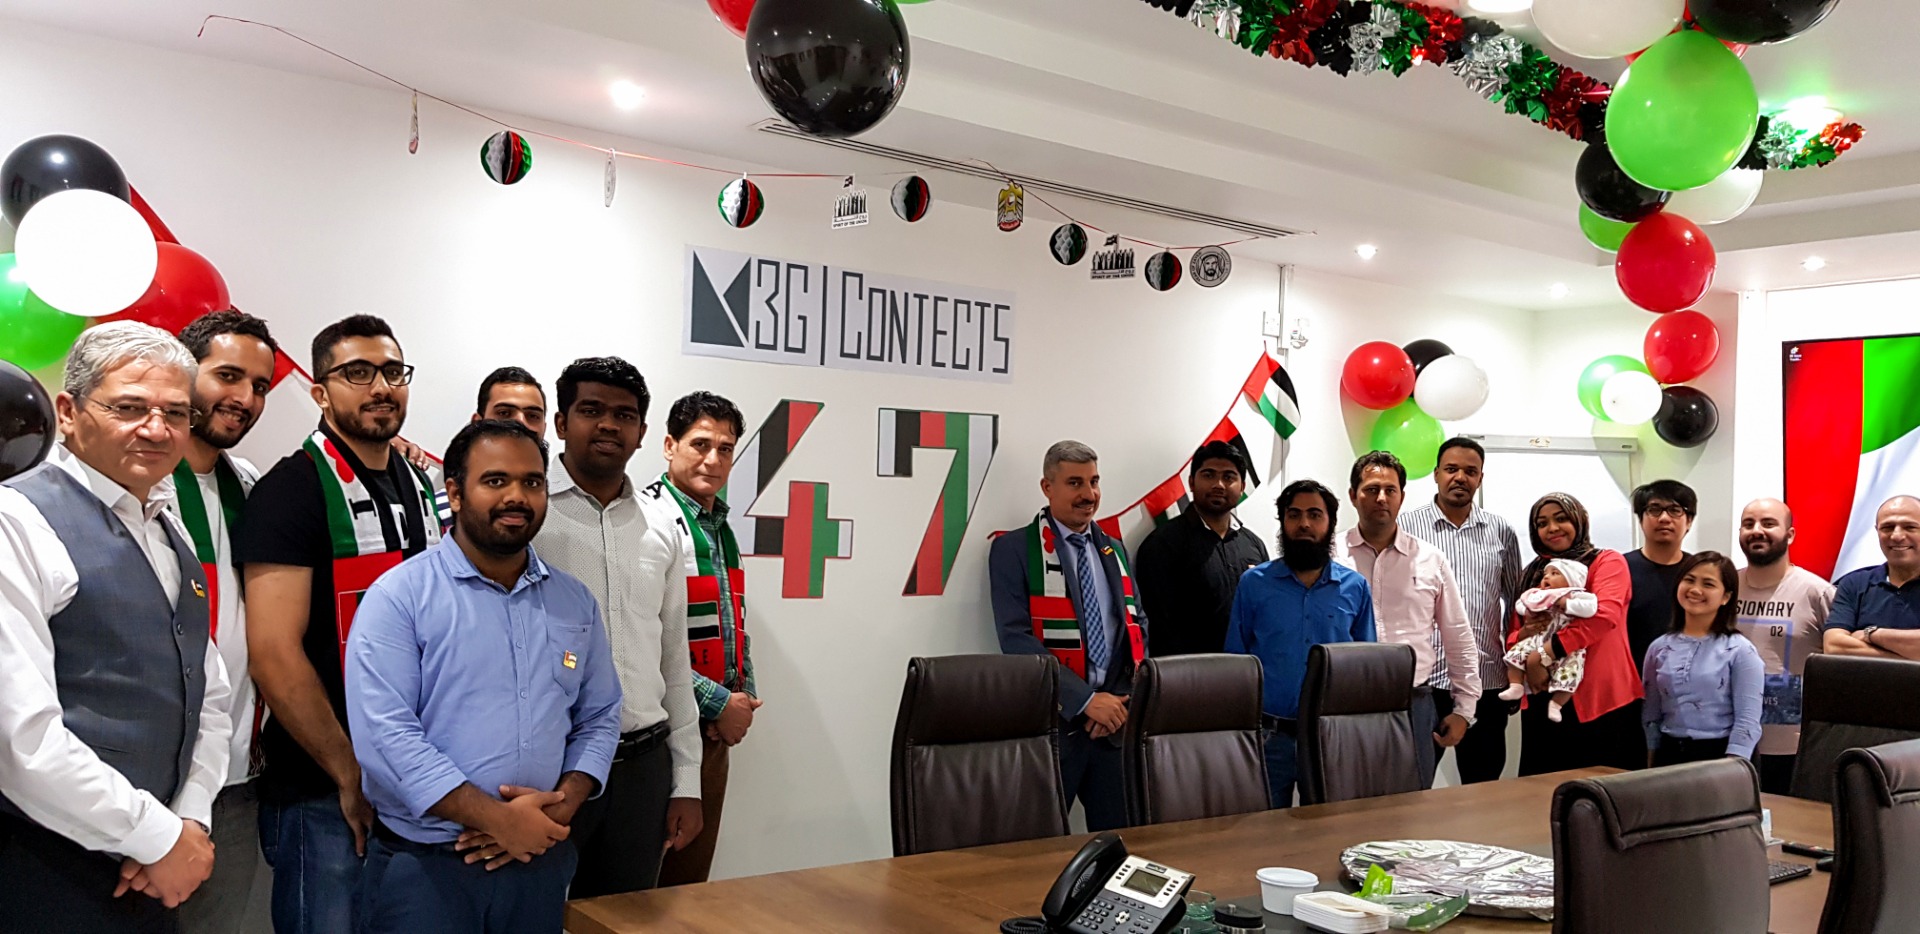 47th UAE National Day | 3G|Contects - Engineering Consultants Office Team Celebration